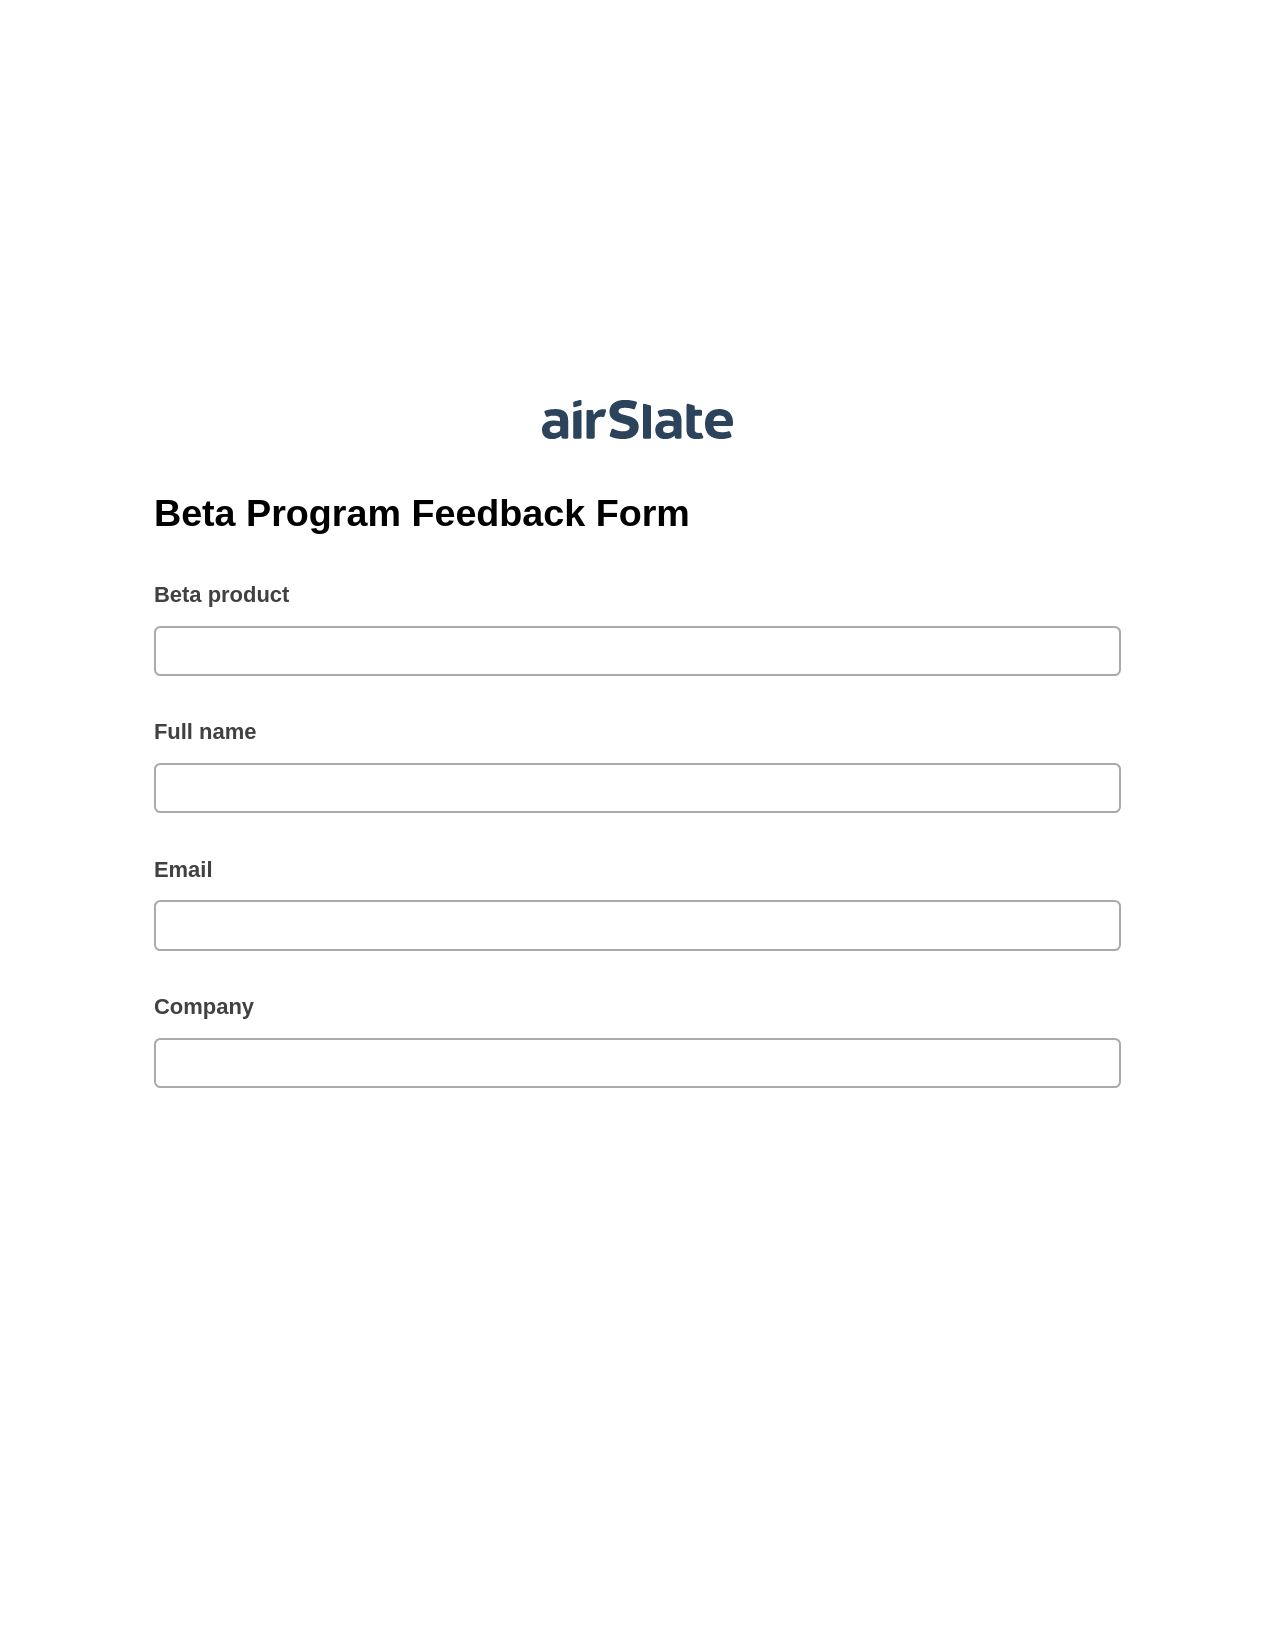 Multirole Beta Program Feedback Form Pre-fill Dropdown from Airtable, Open as Role Bot, Archive to SharePoint Folder Bot